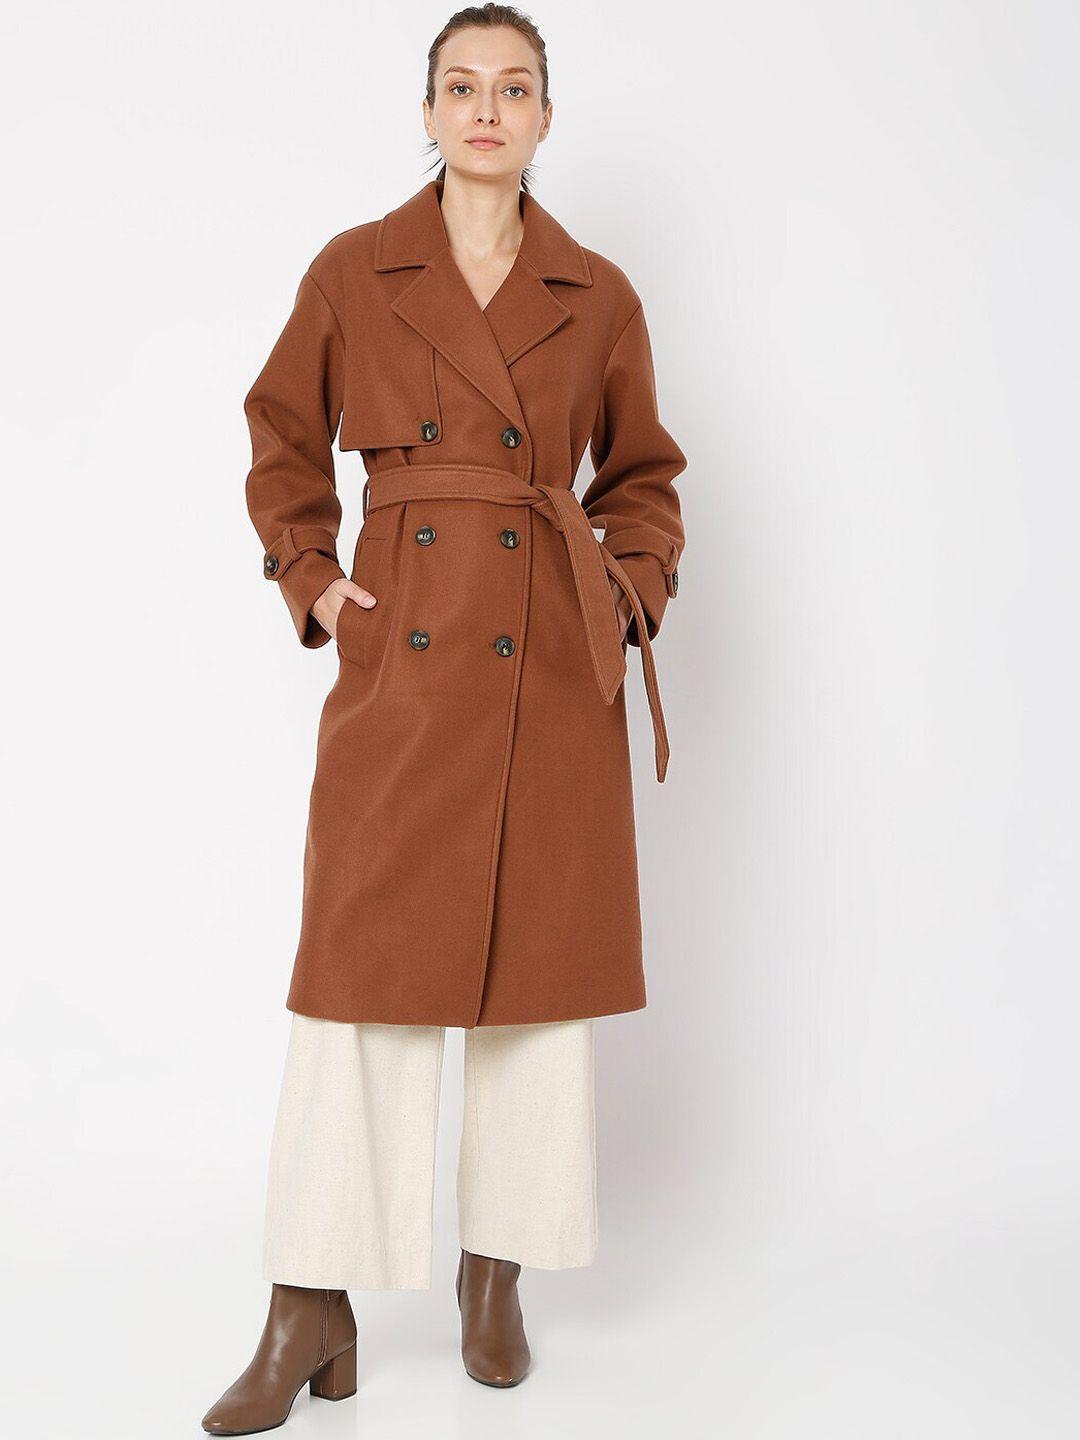 vero moda women brown solid double-breasted longline trench coat